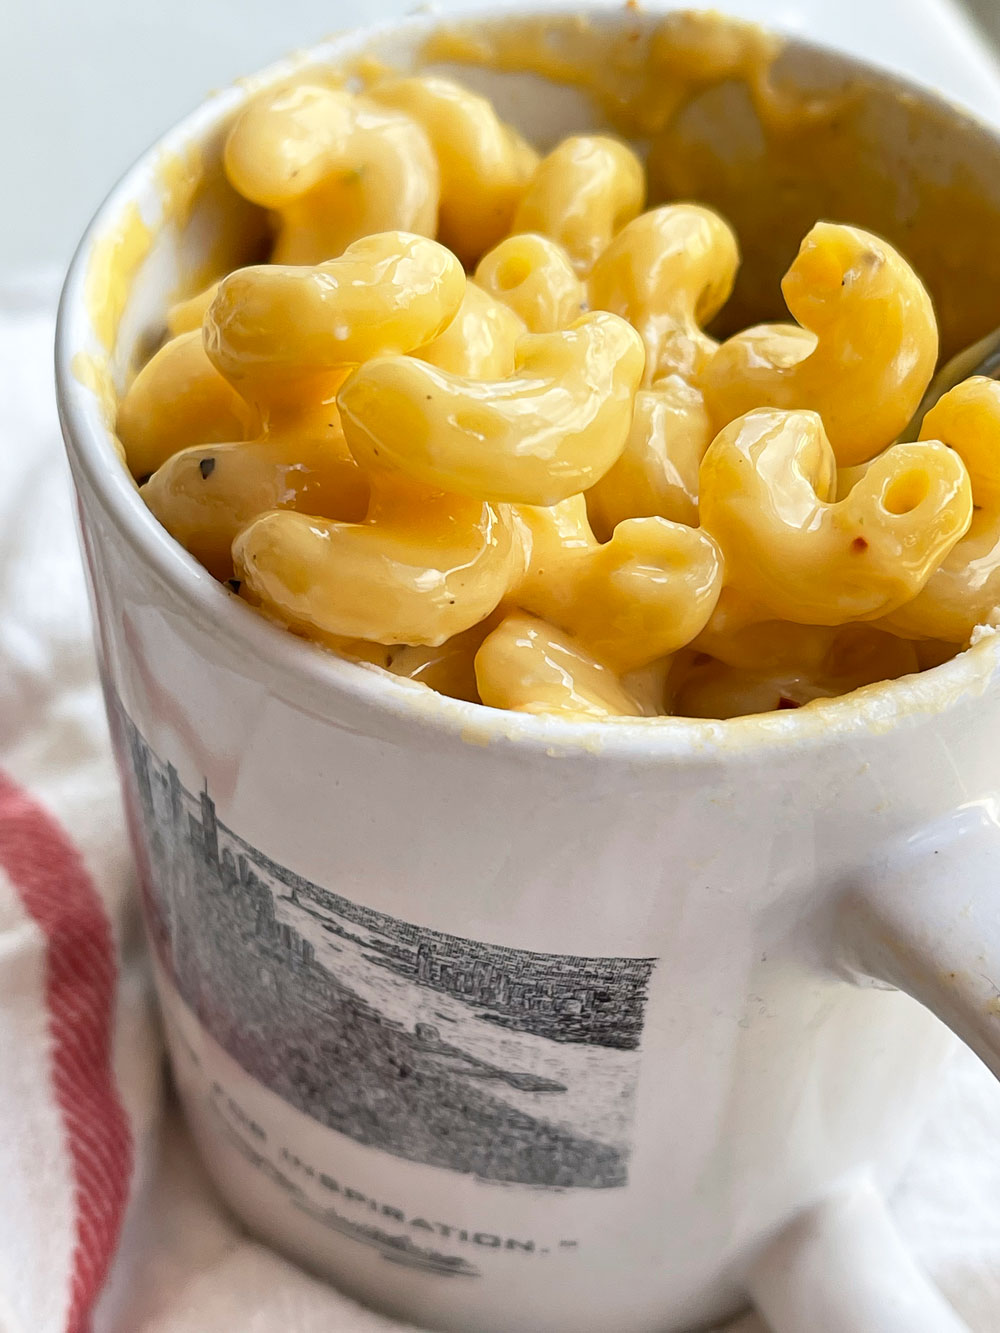 Microwave Mug Mac and Cheese. This is an easy recipe for midnight pasta cravings, easy dinner ideas, or someone who cooks for 1. Happy Pasta Making! www.ChopHappy.com #Macandcheesehack #mugmacandcheese